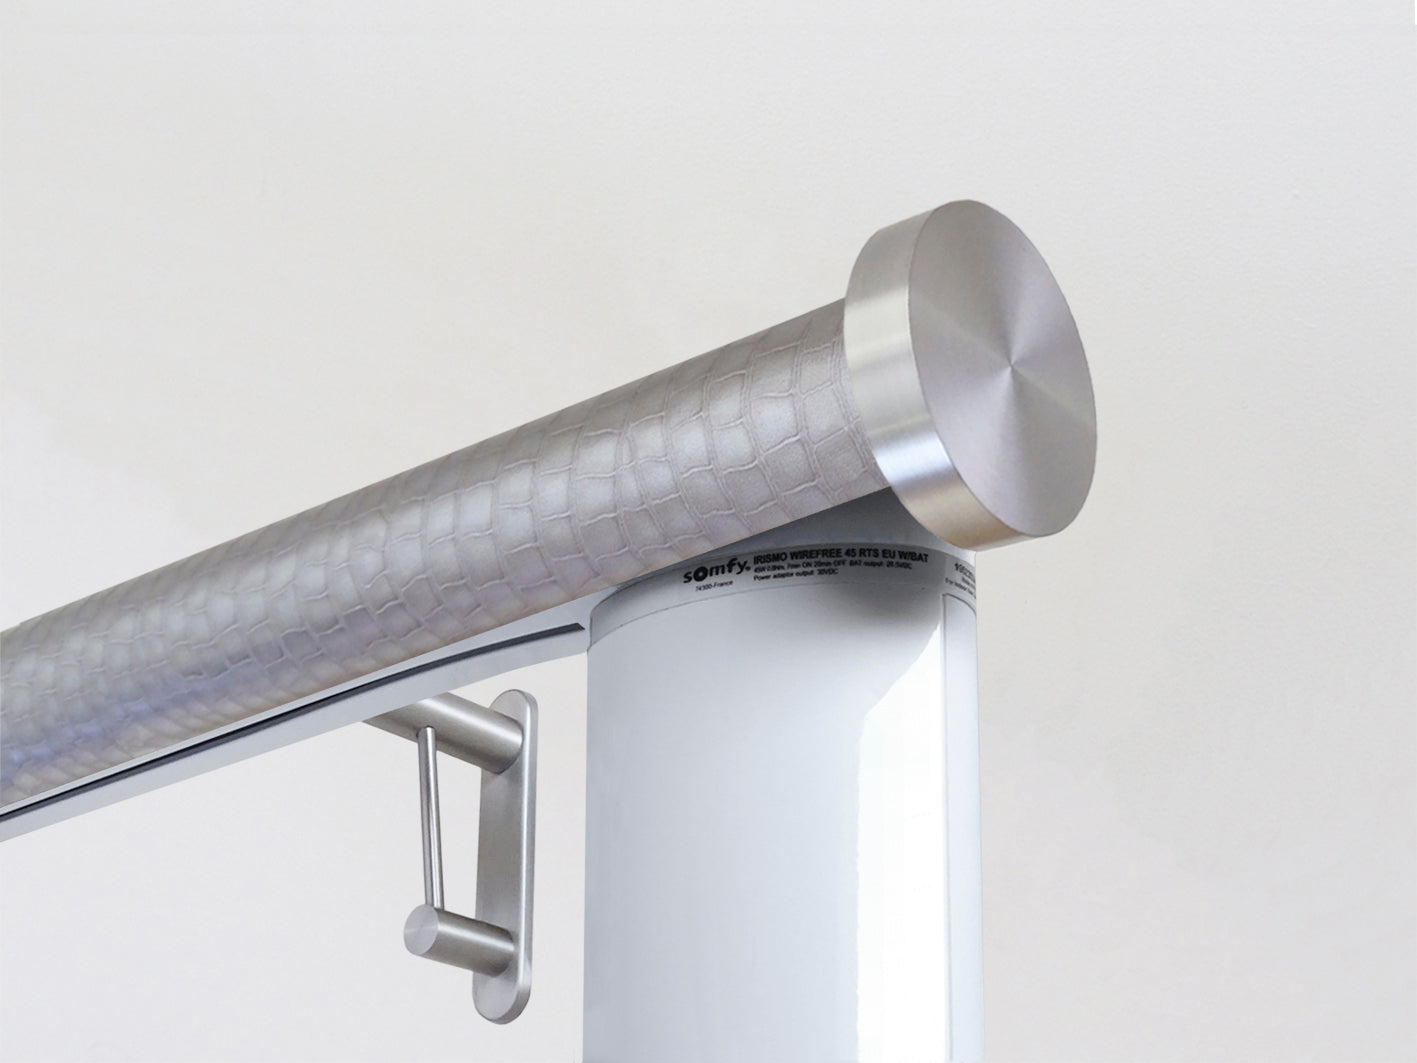 Motorised electric curtain pole in rose pewter grey, wireless & battery powered using the Somfy Glydea track | Walcot House UK curtain pole specialists